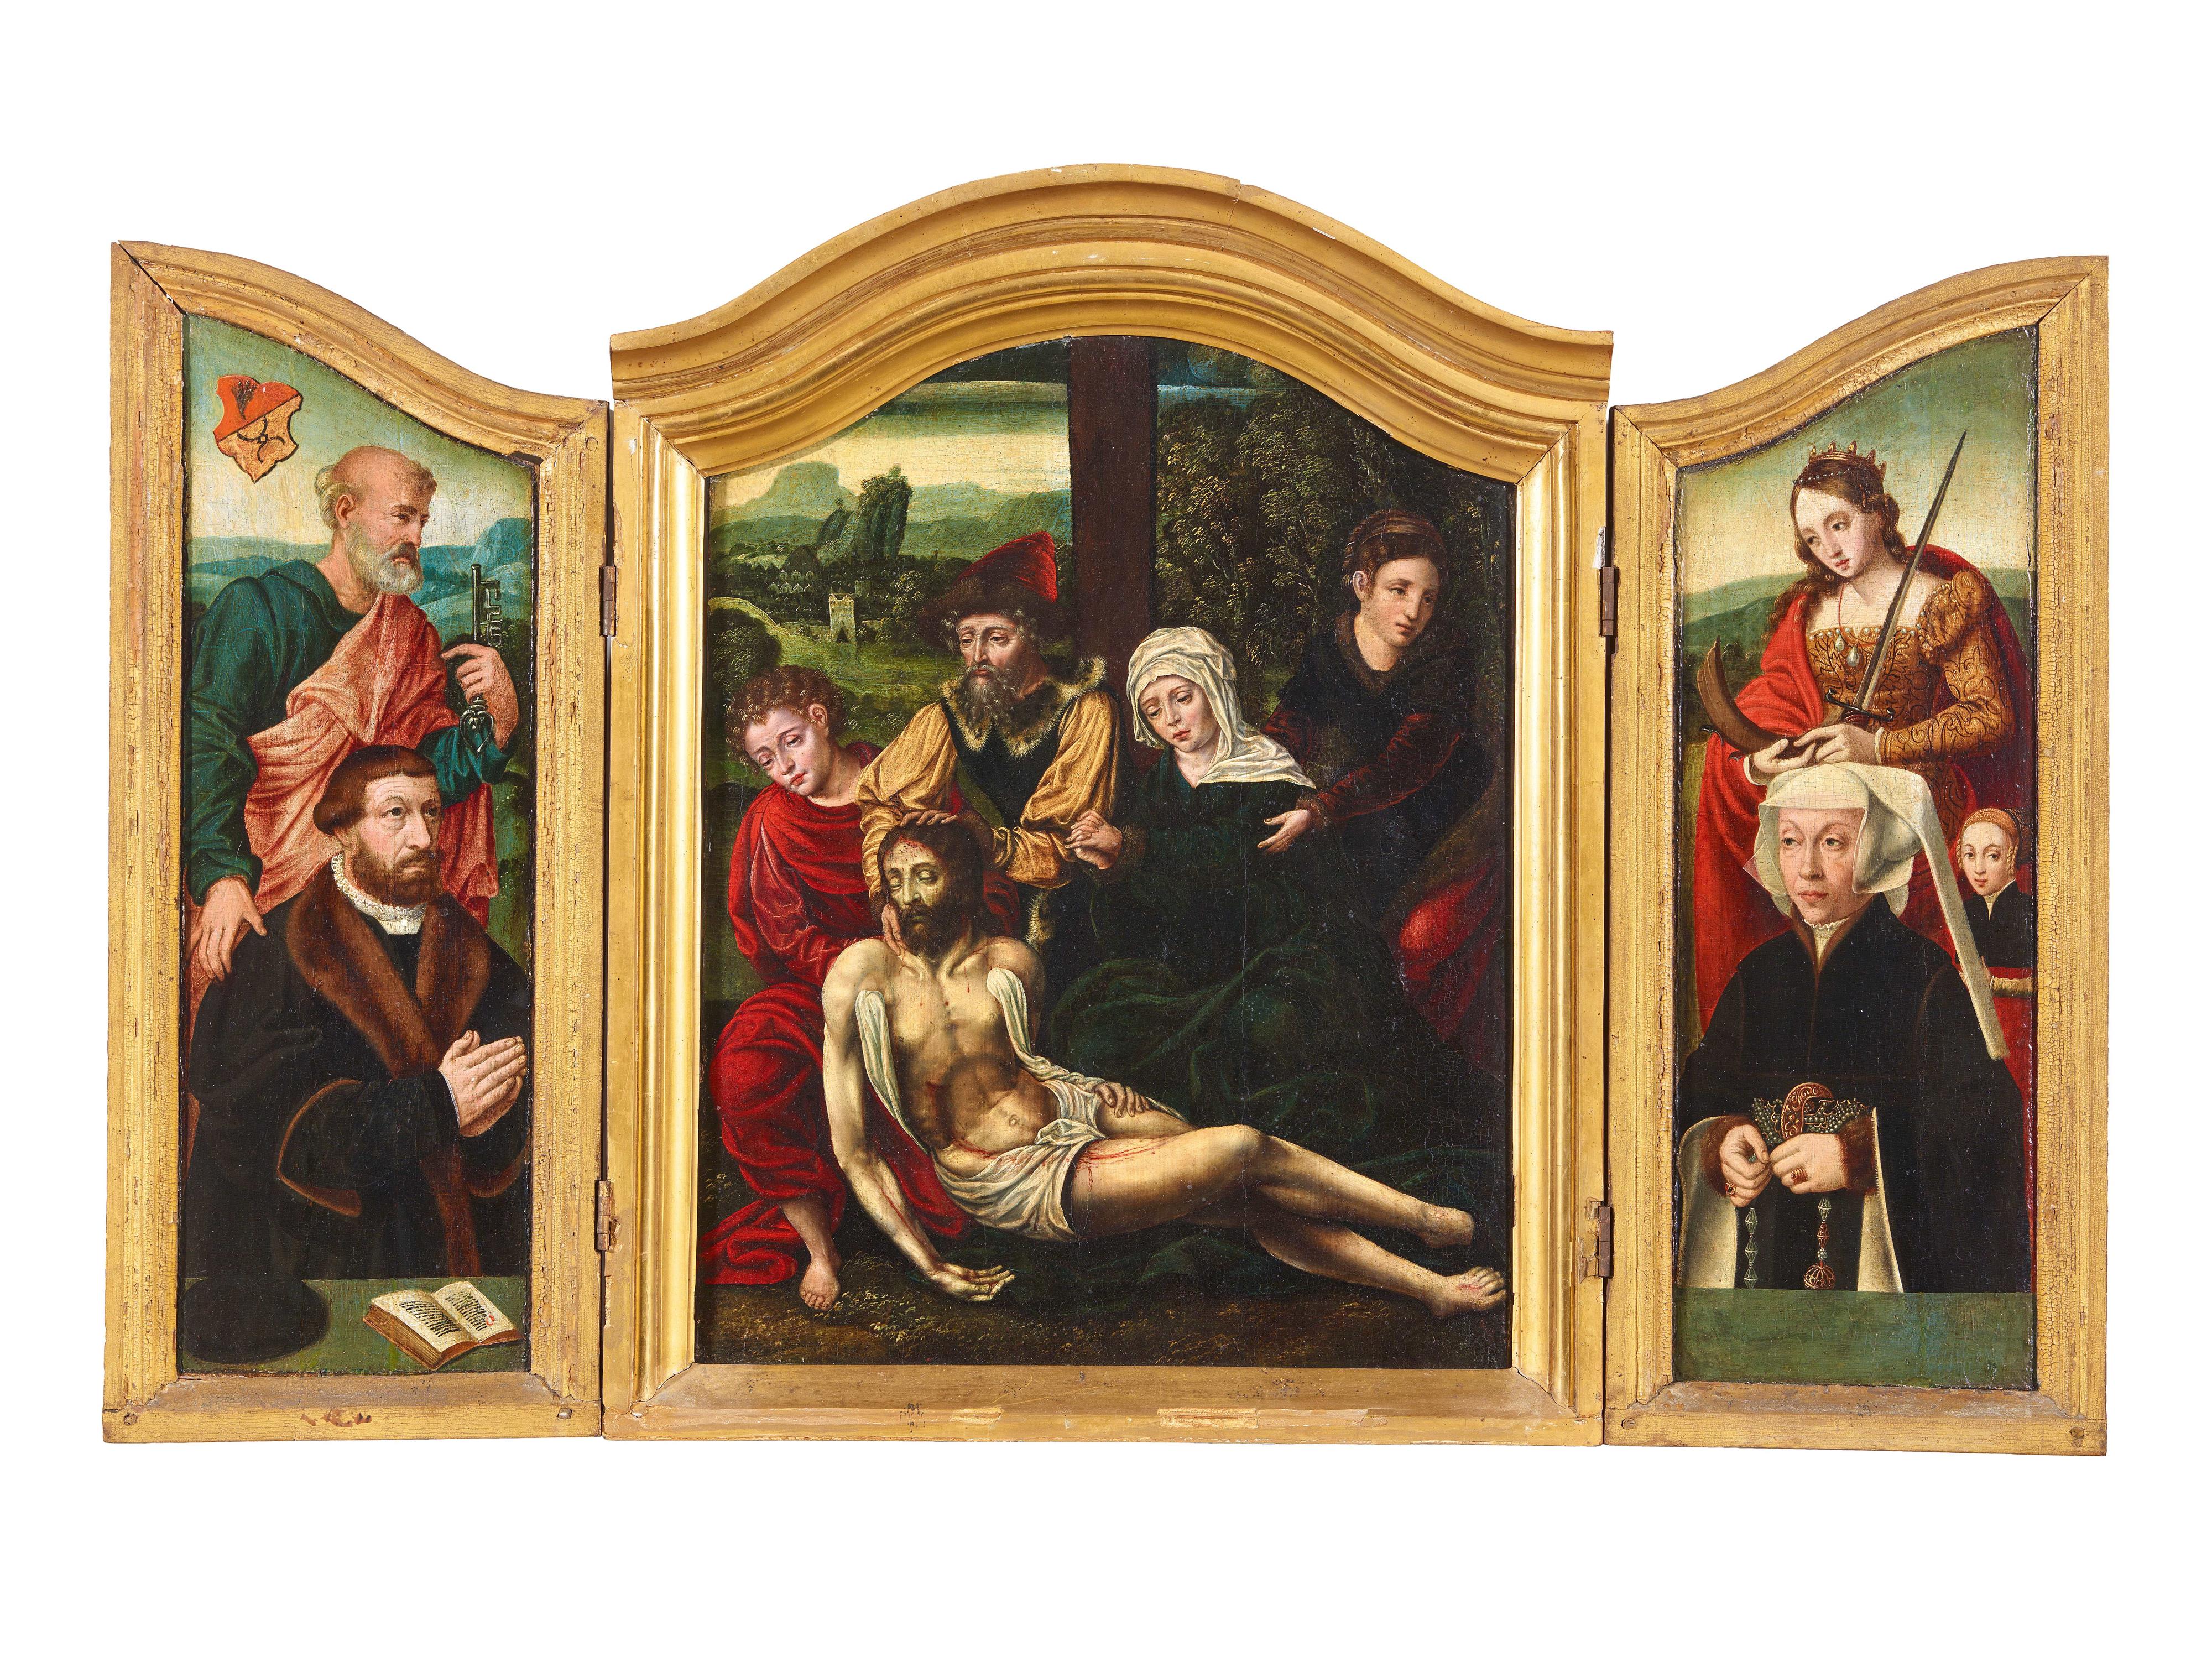 Antwerp School
Bartholomaeus Bruyn the Elder, studio of - Flemish Triptych with the Lamentation and Cologne Donor Portraits - image-1